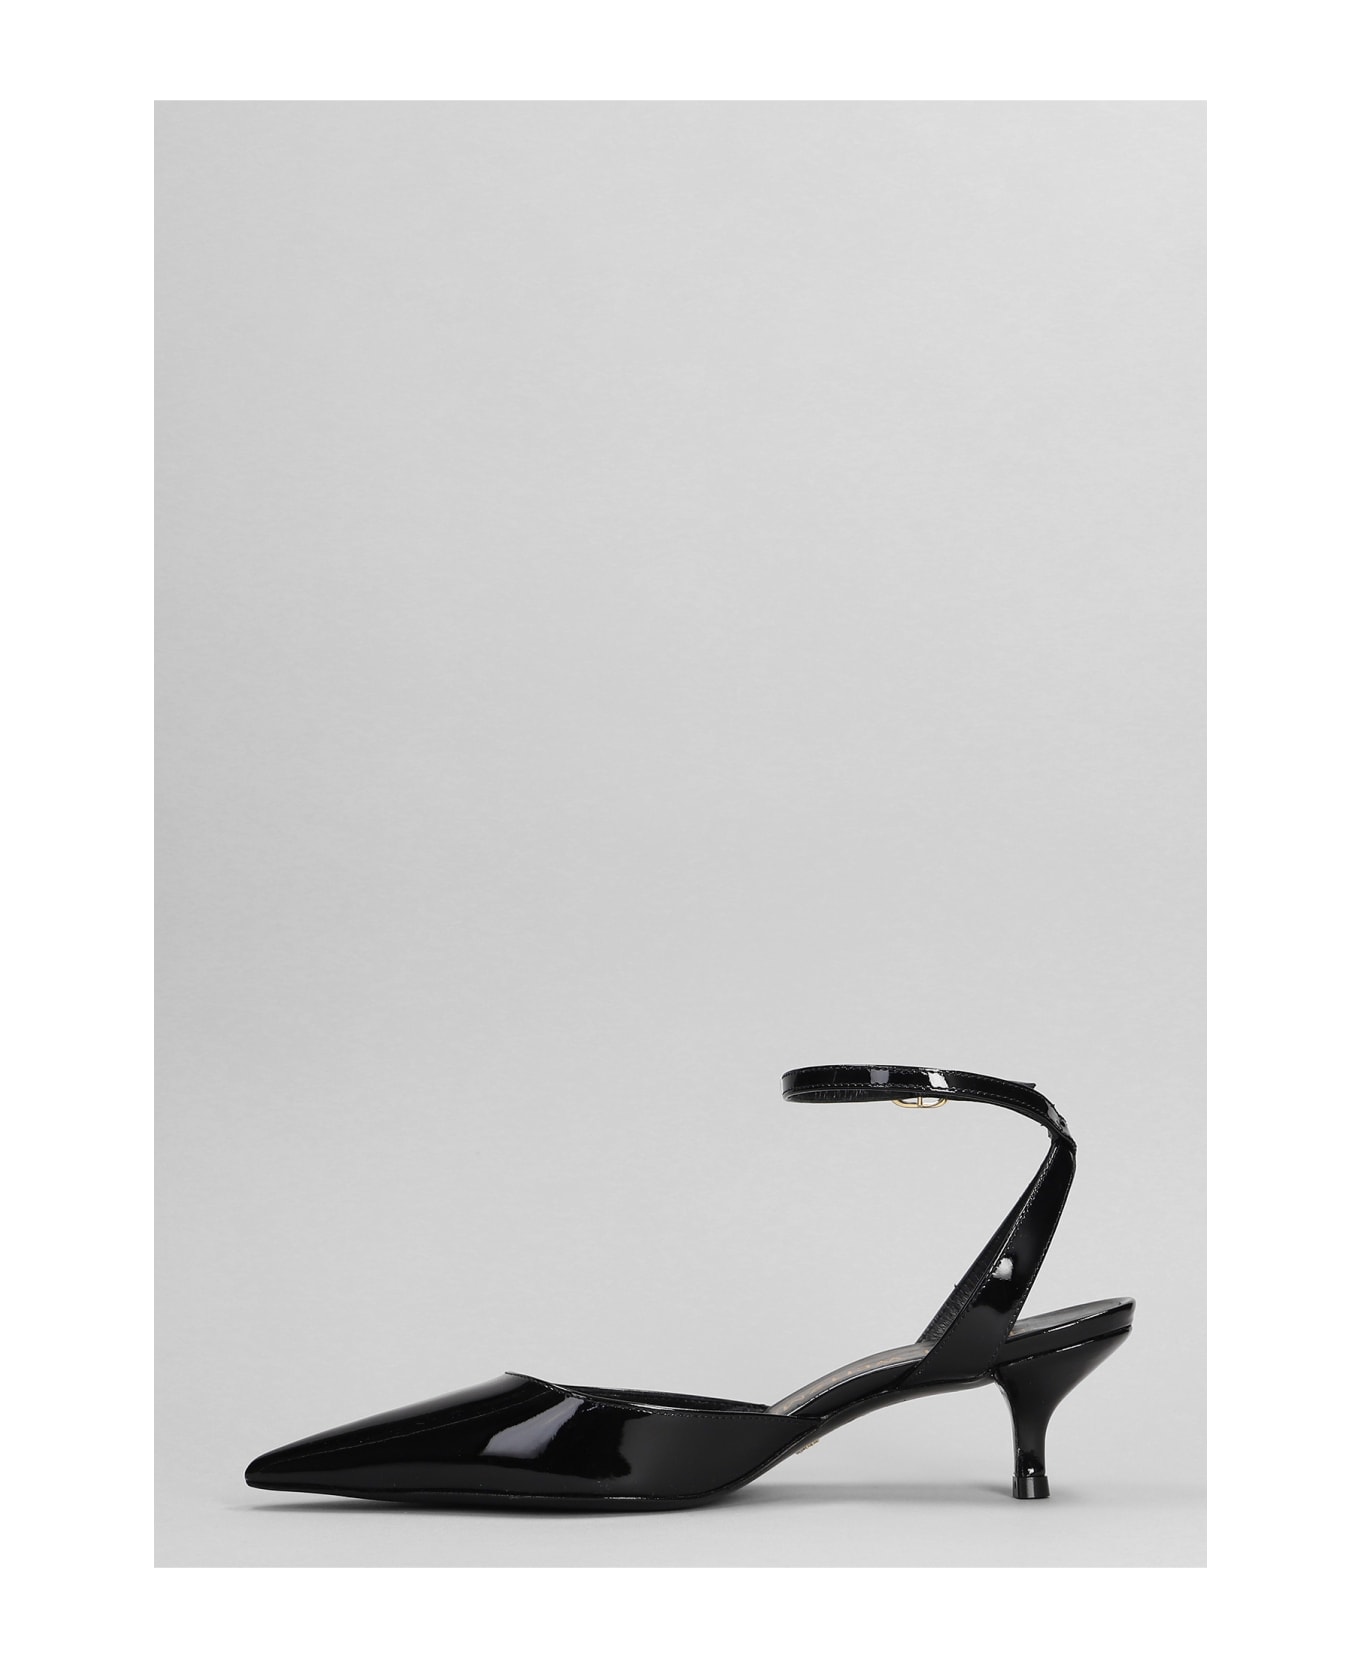 Stuart Weitzman Barelythere 50 Pumps In Black Patent Leather - black